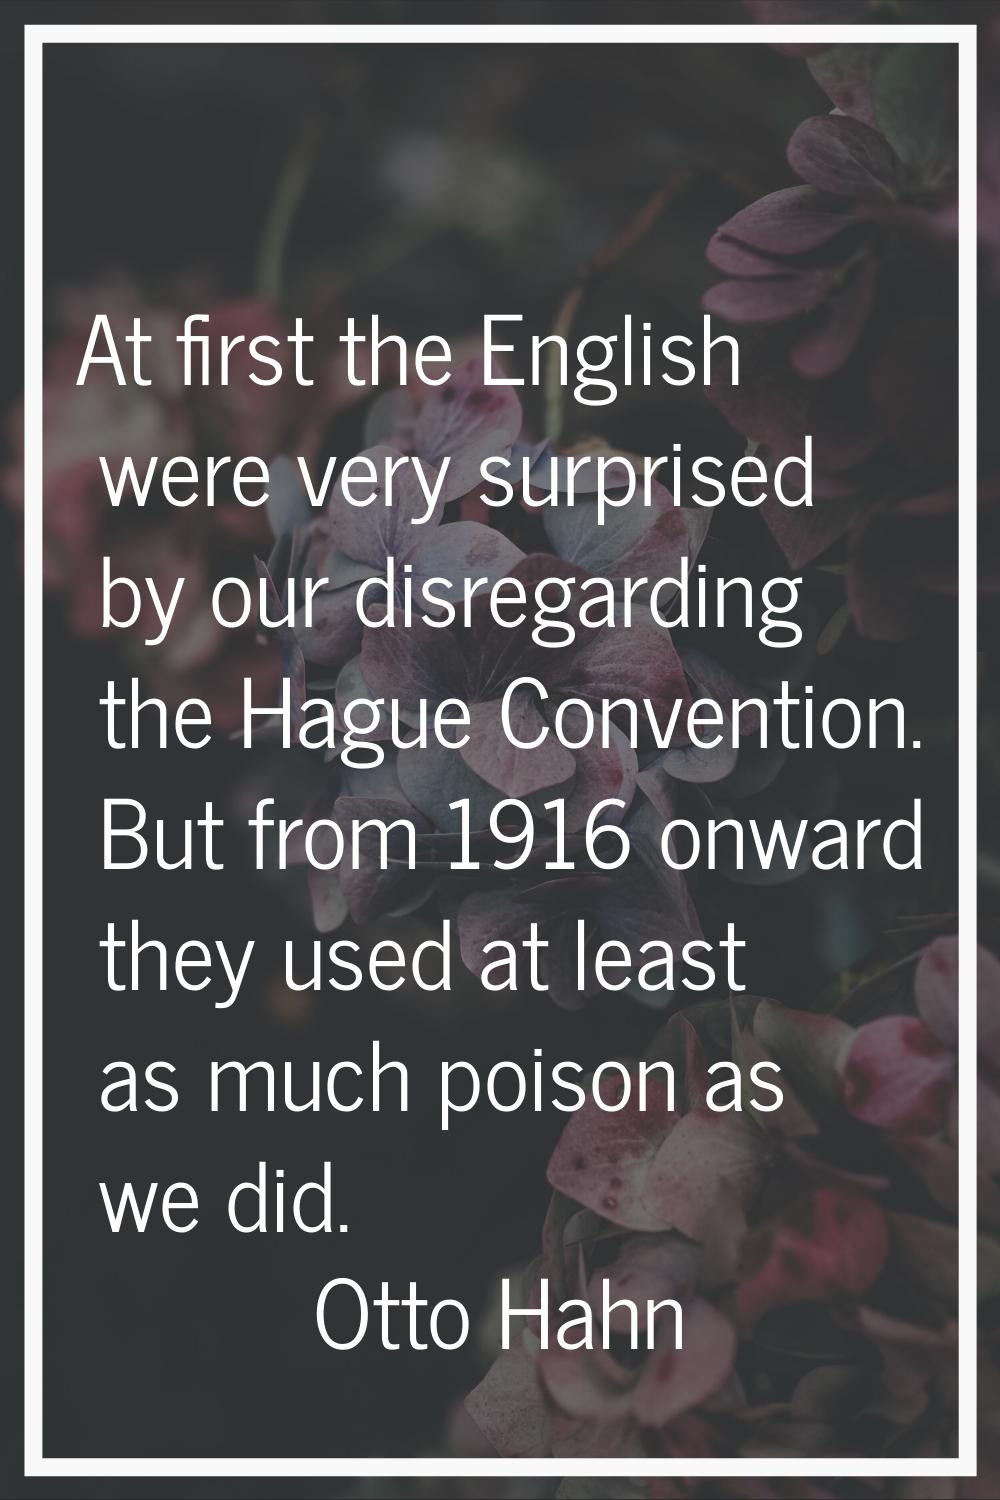 At first the English were very surprised by our disregarding the Hague Convention. But from 1916 on